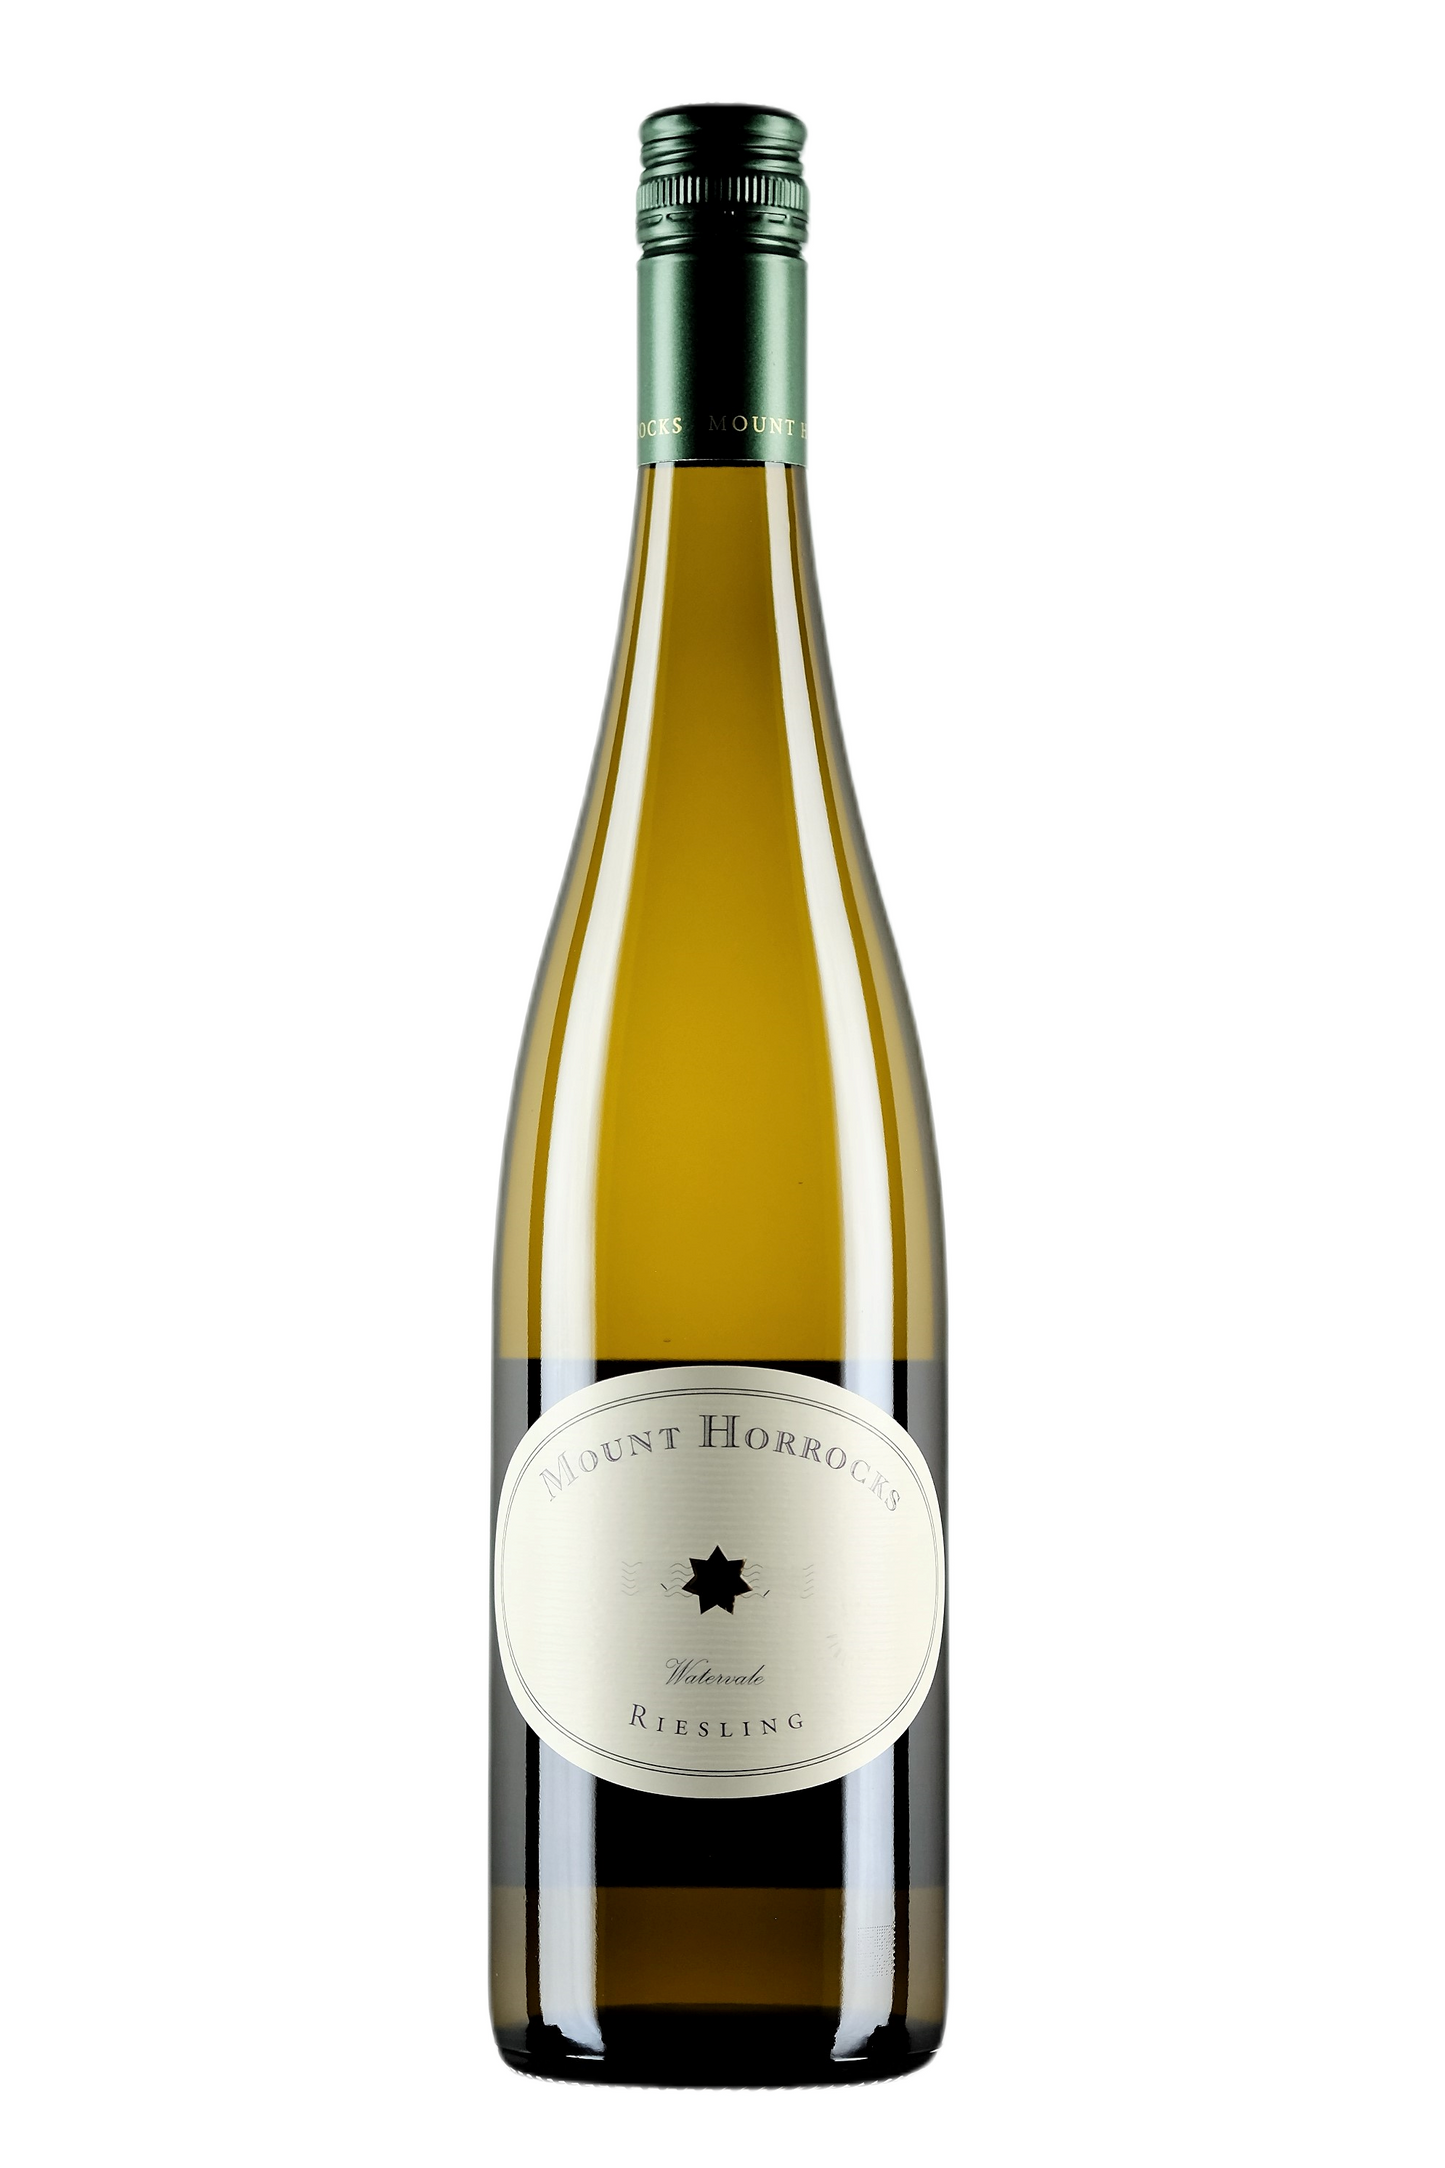 Mount Horrocks Clare Valley Riesling